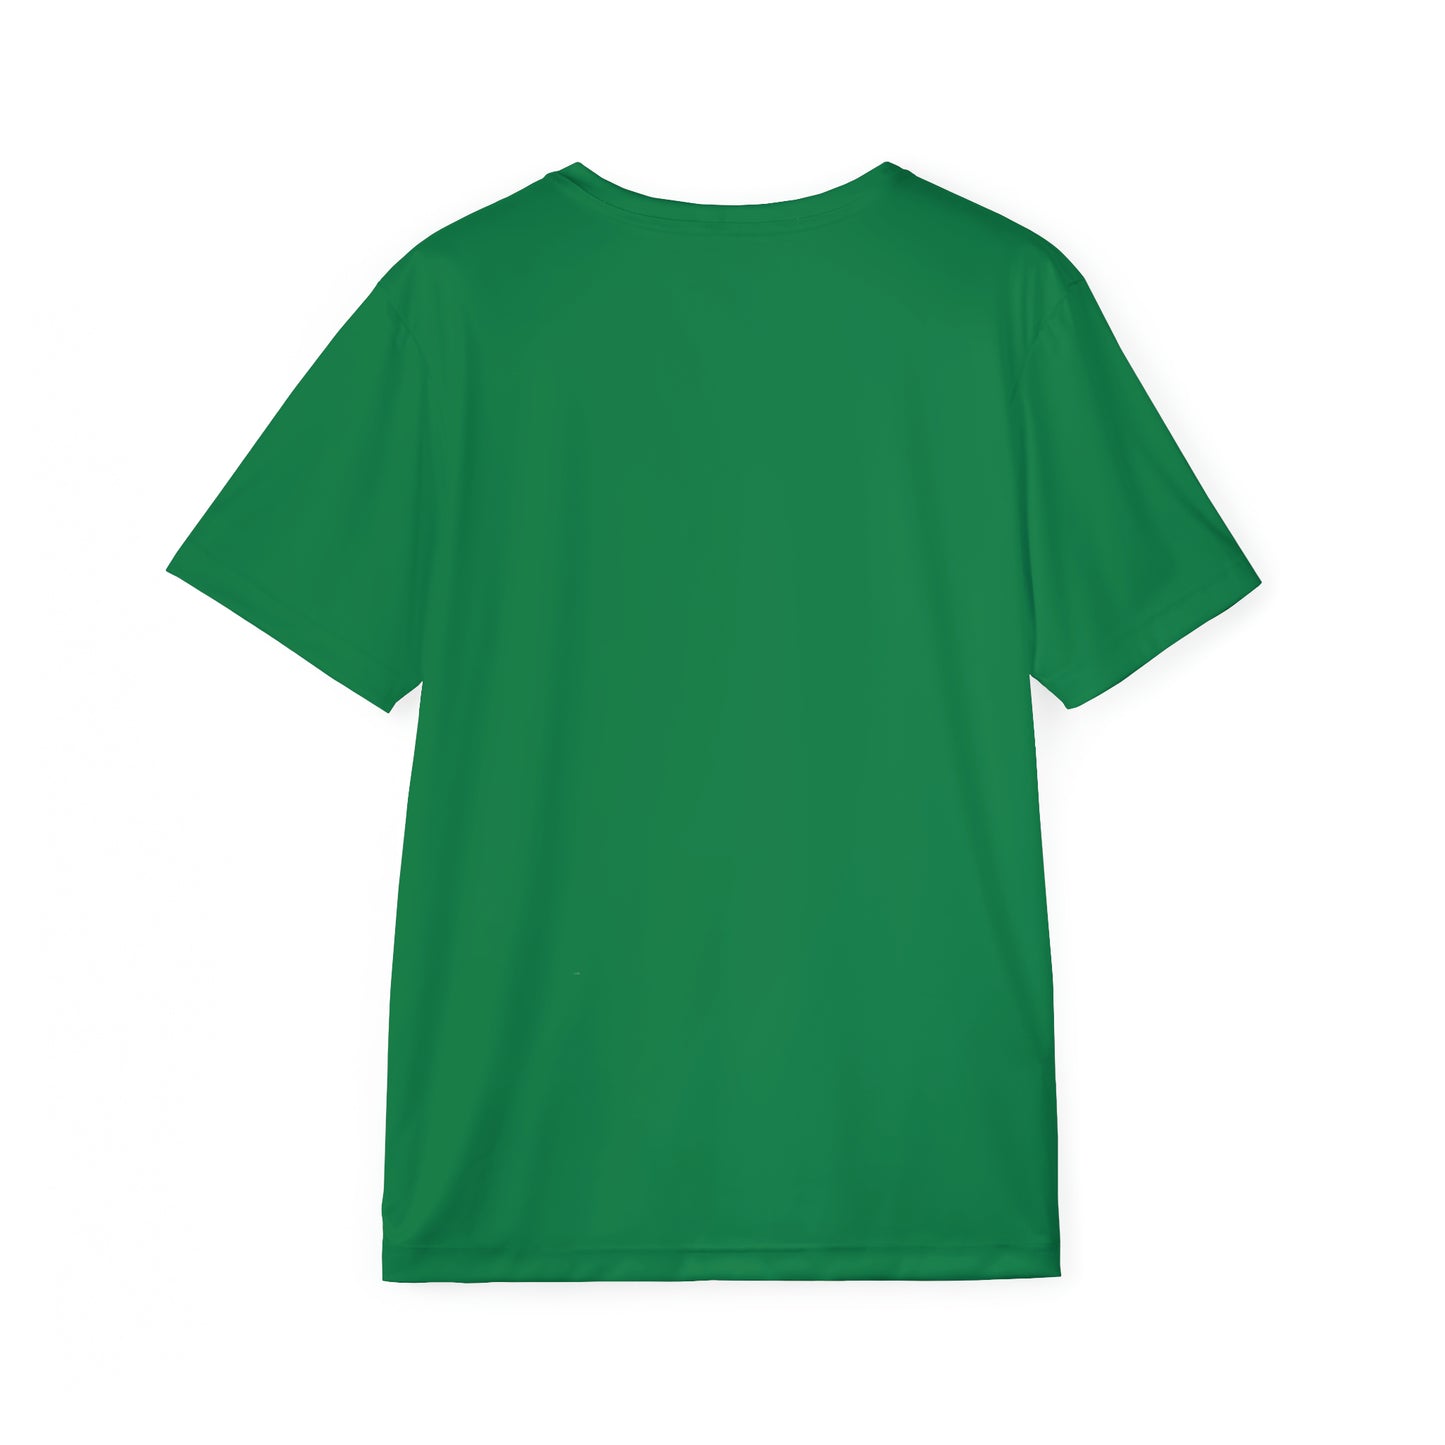 FOOD FOREST Men's Sports Jersey, Green